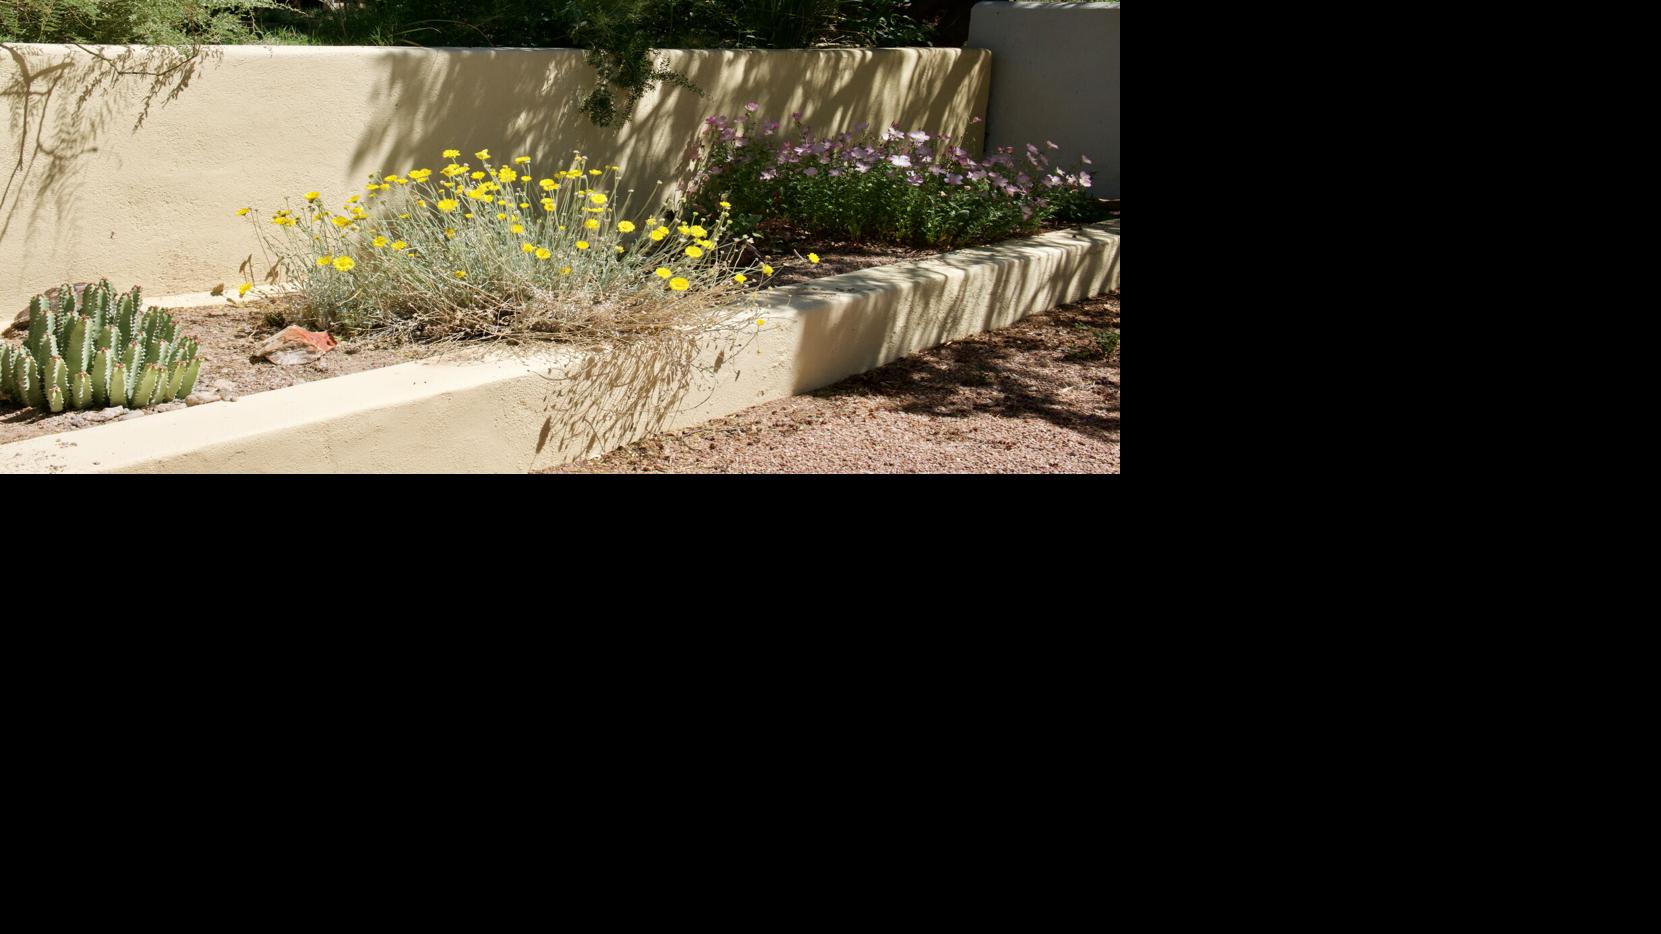 Making garden microclimates work for you in your Tucson yard